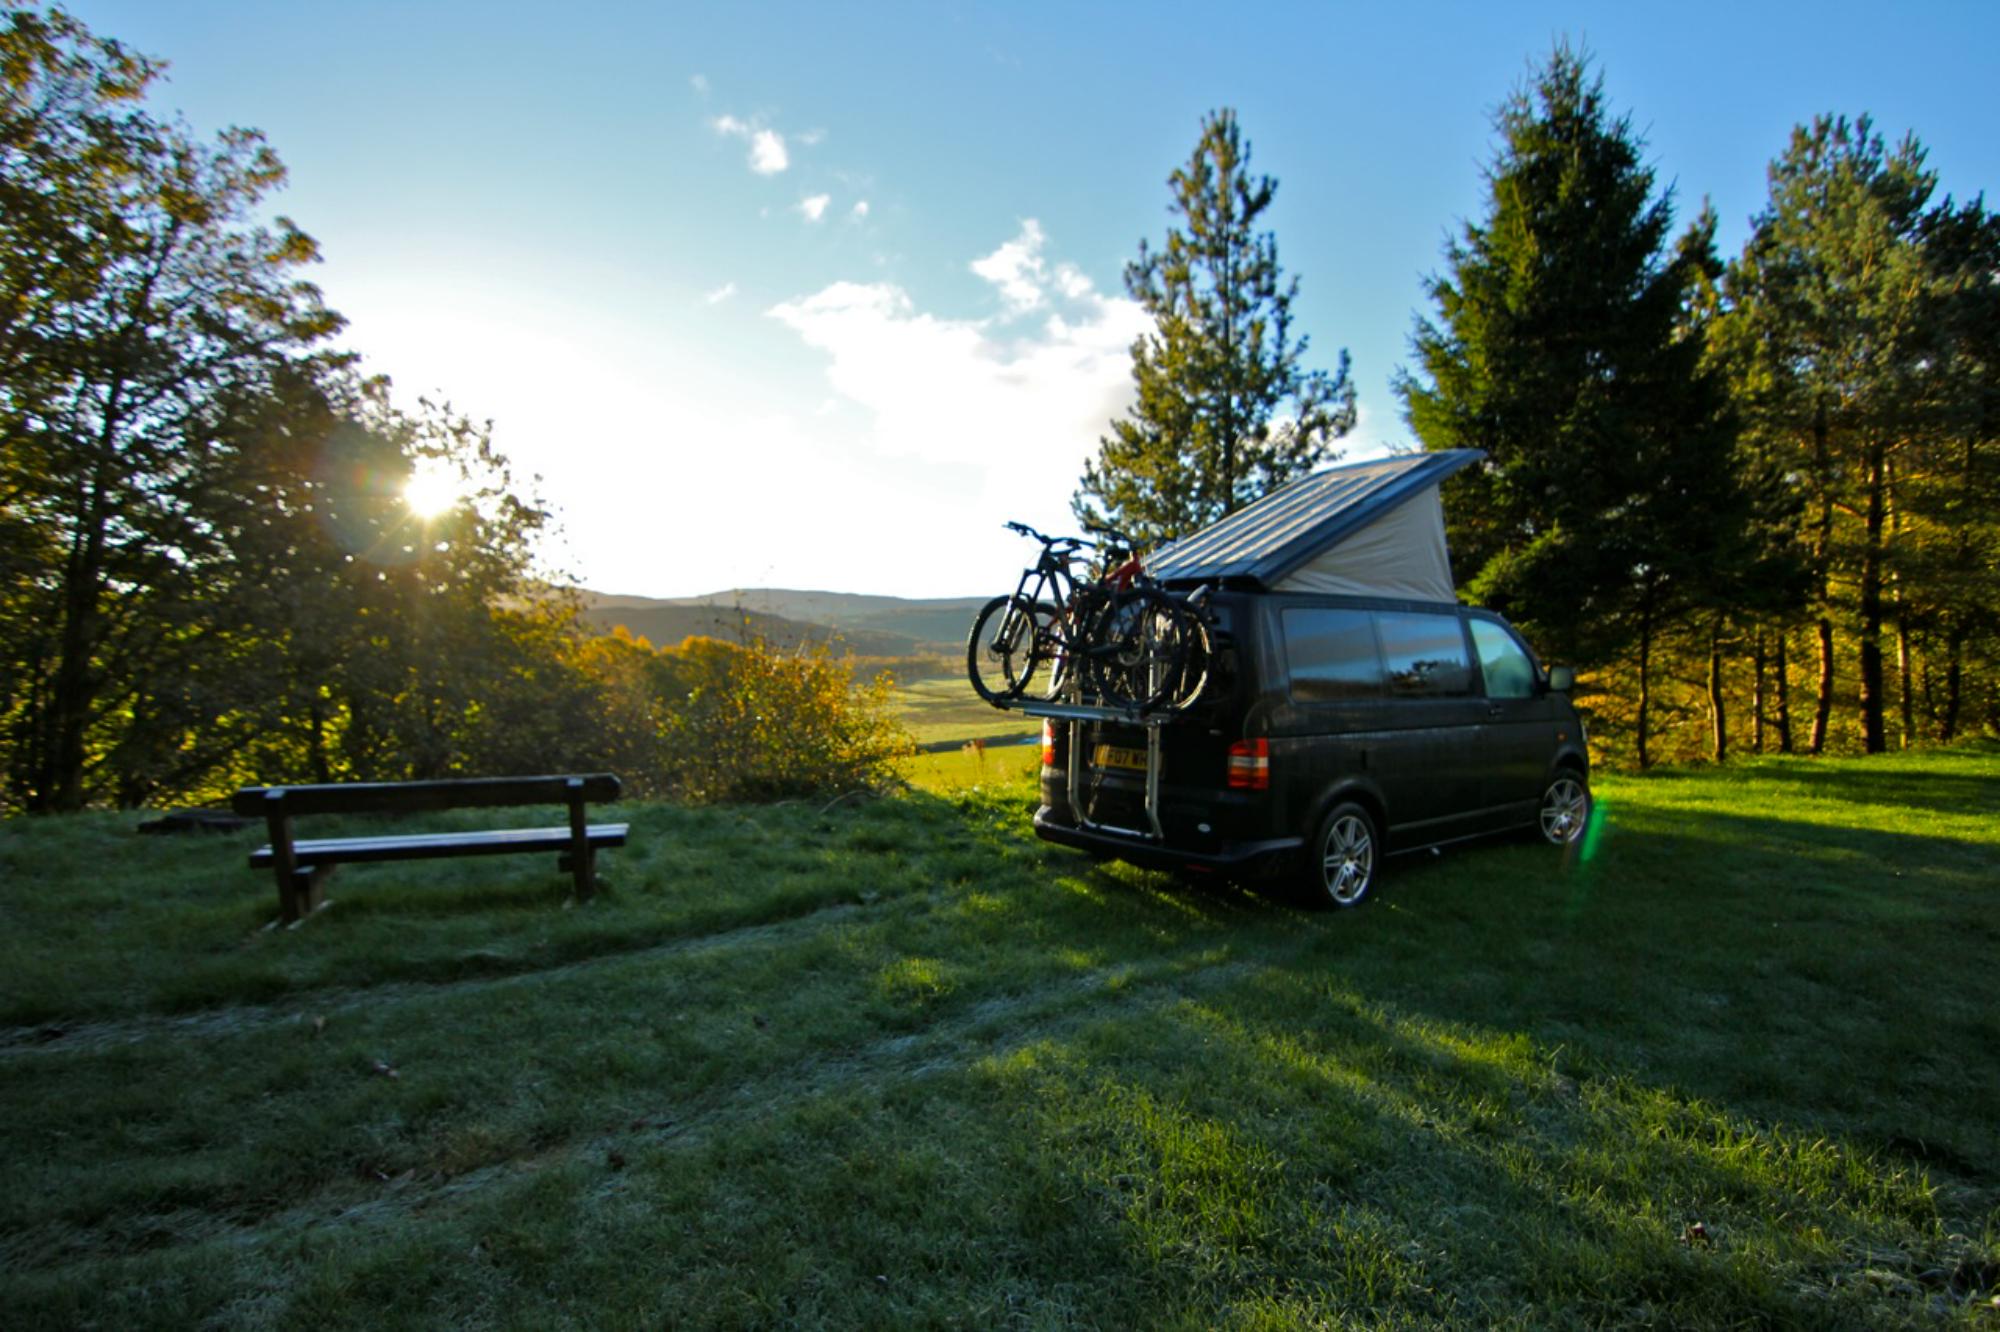 Campervan Hire in Greater Manchester | Motorhome Rental in Greater Manchester, UK